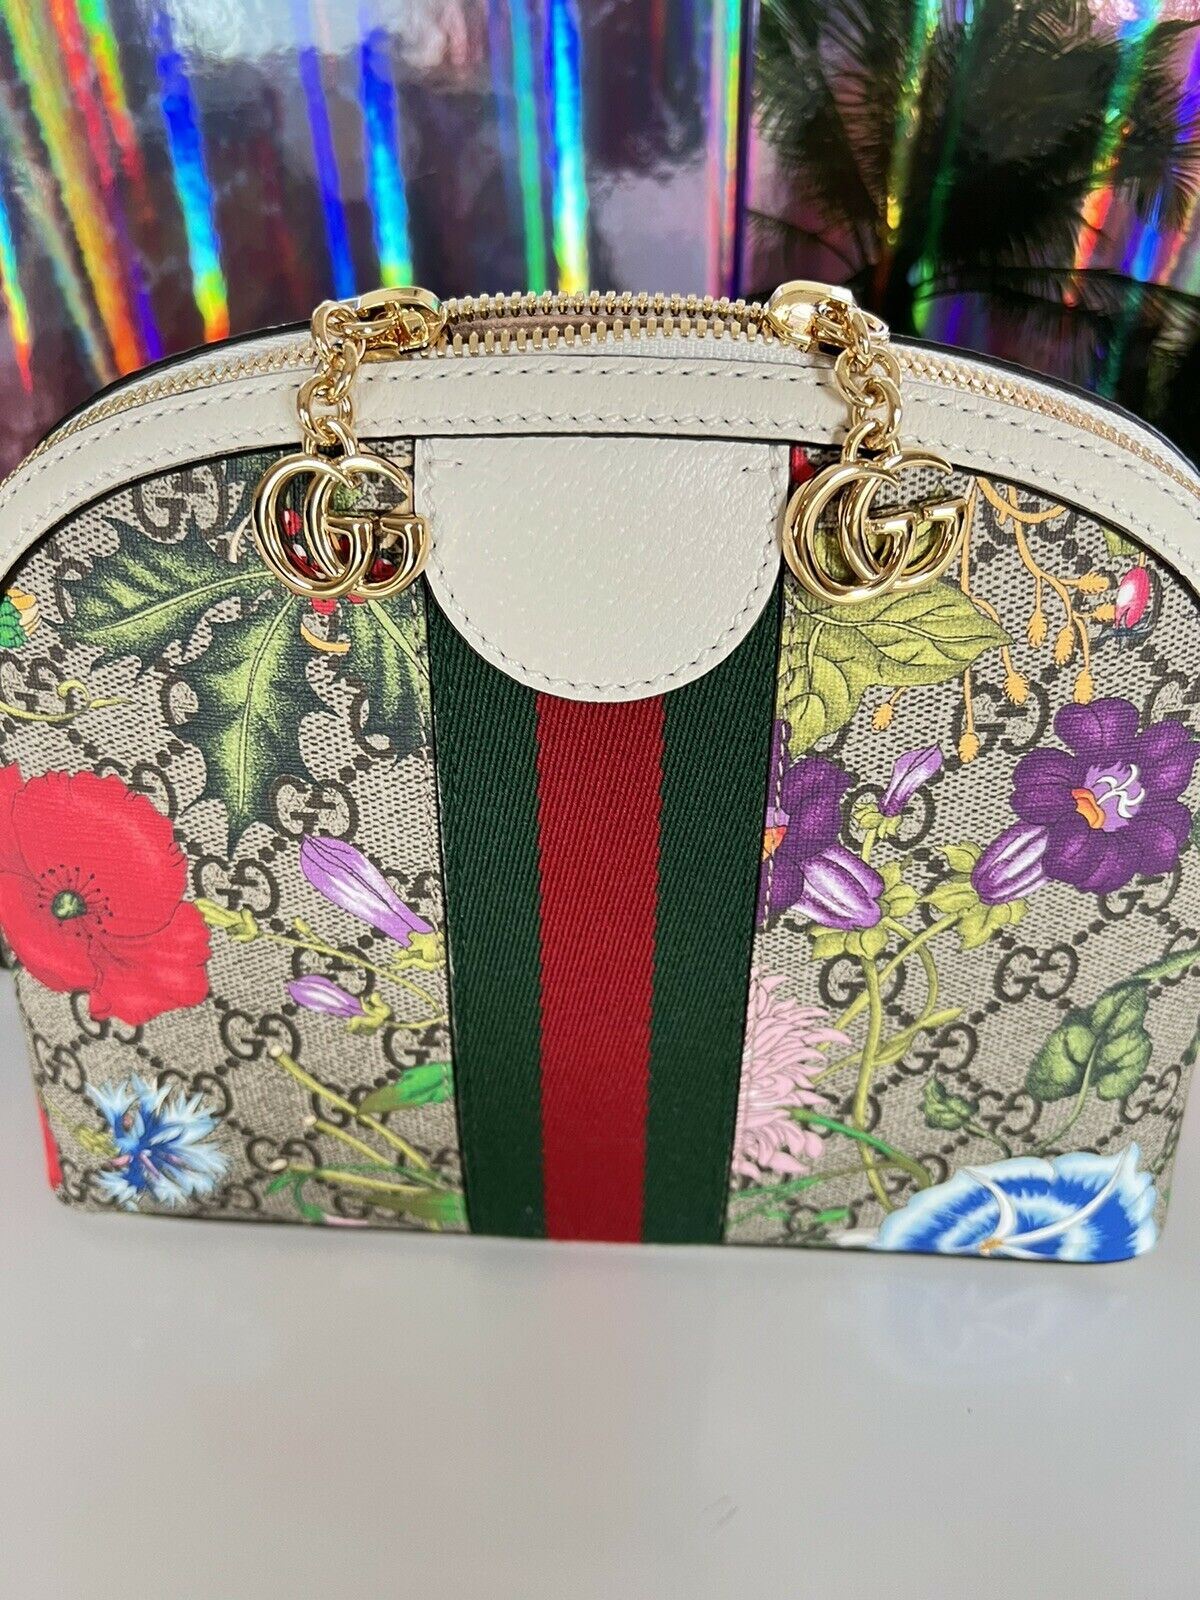 NWT GUCCI GG Ophidia Flora Web Small White Shoulder Bag Italy 499621